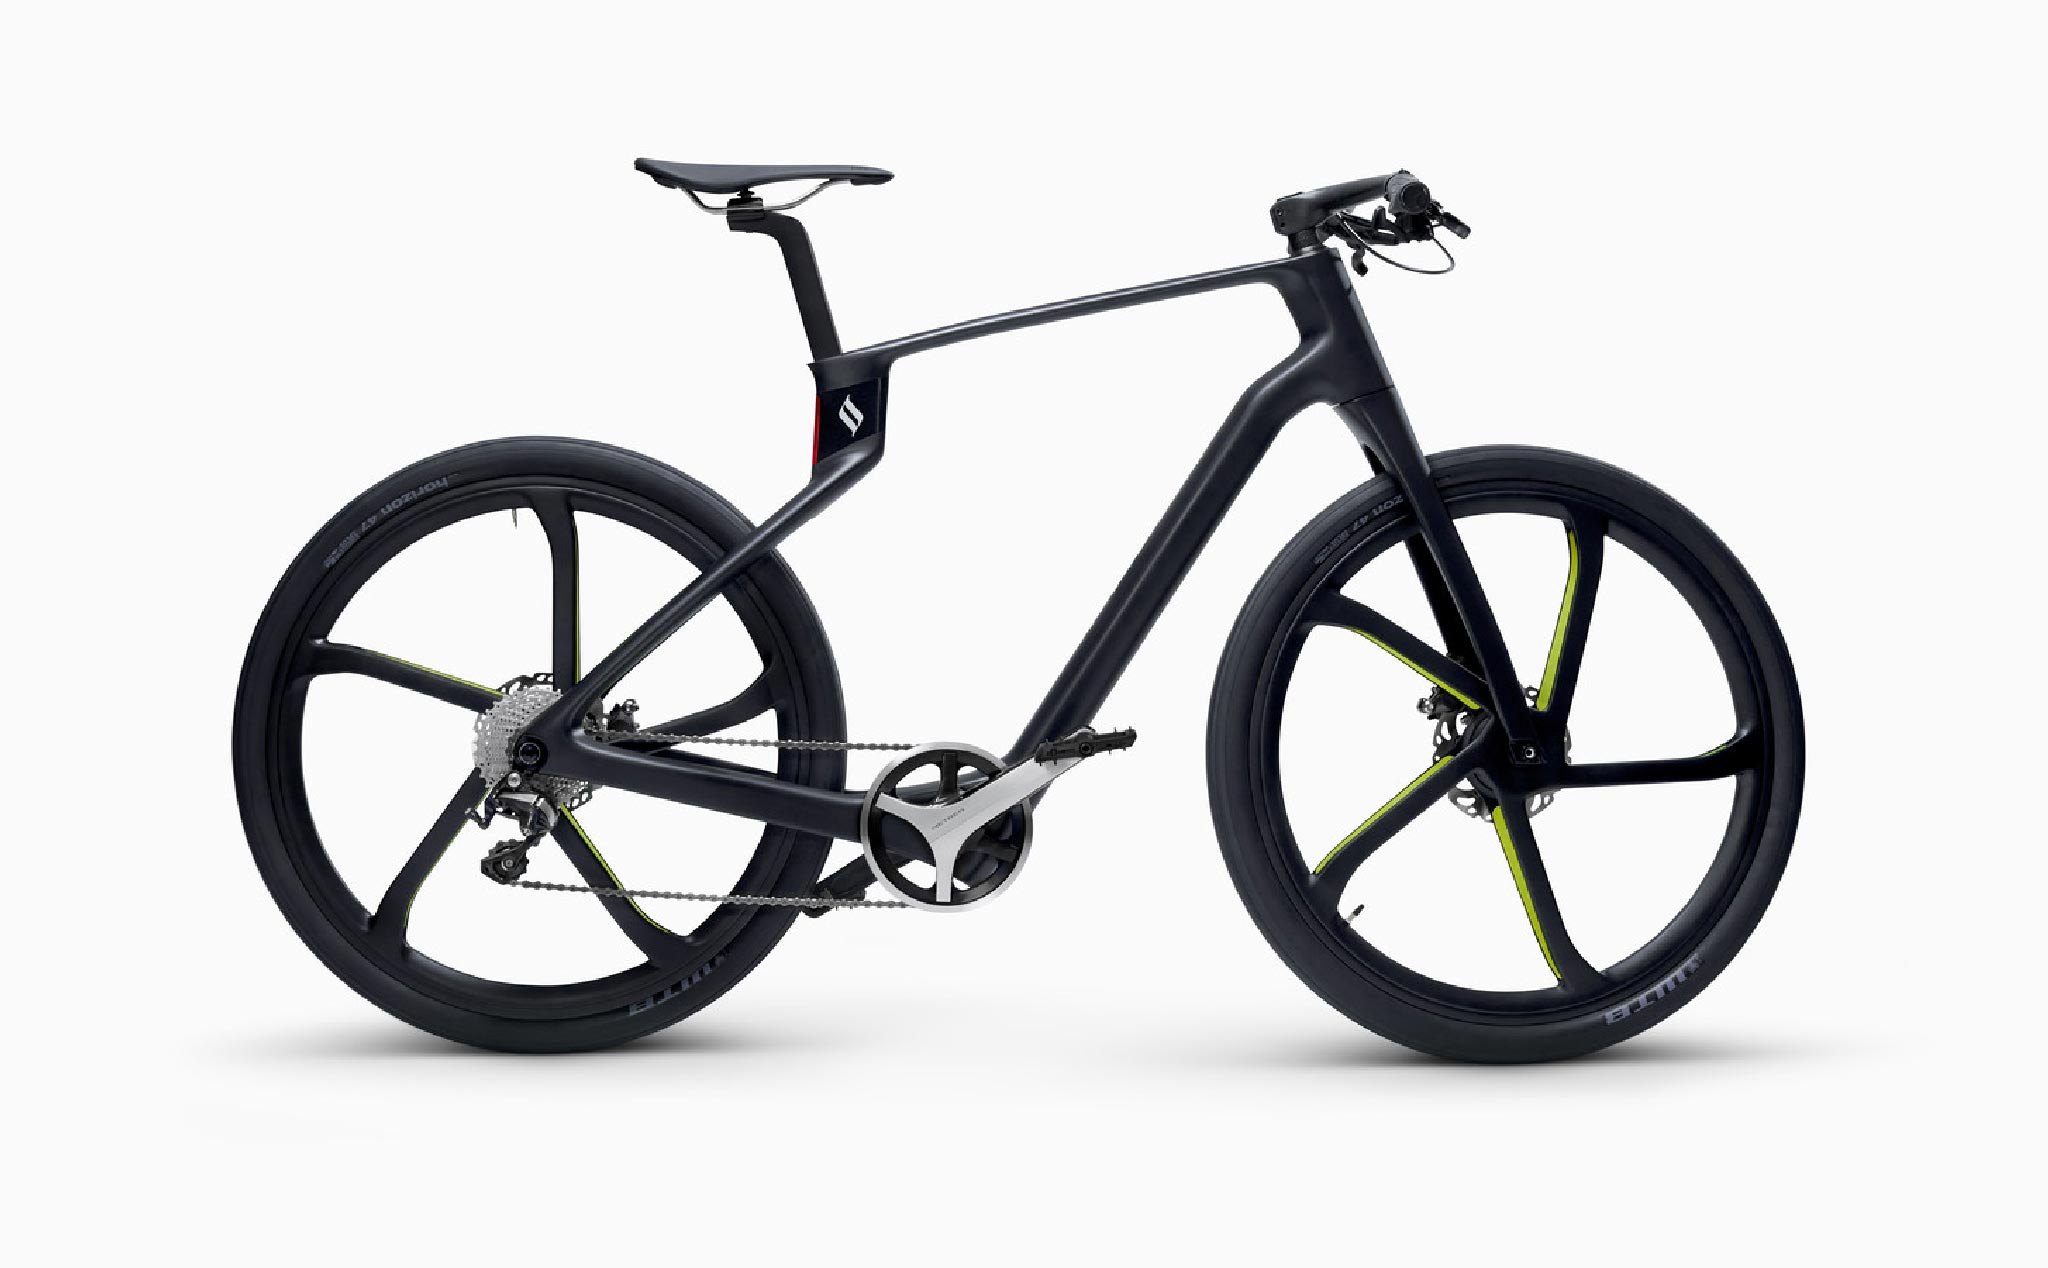 Monolithic carbon fiber bike with 3D printing technology made in Vietnam Superstrata received compliments from the online community